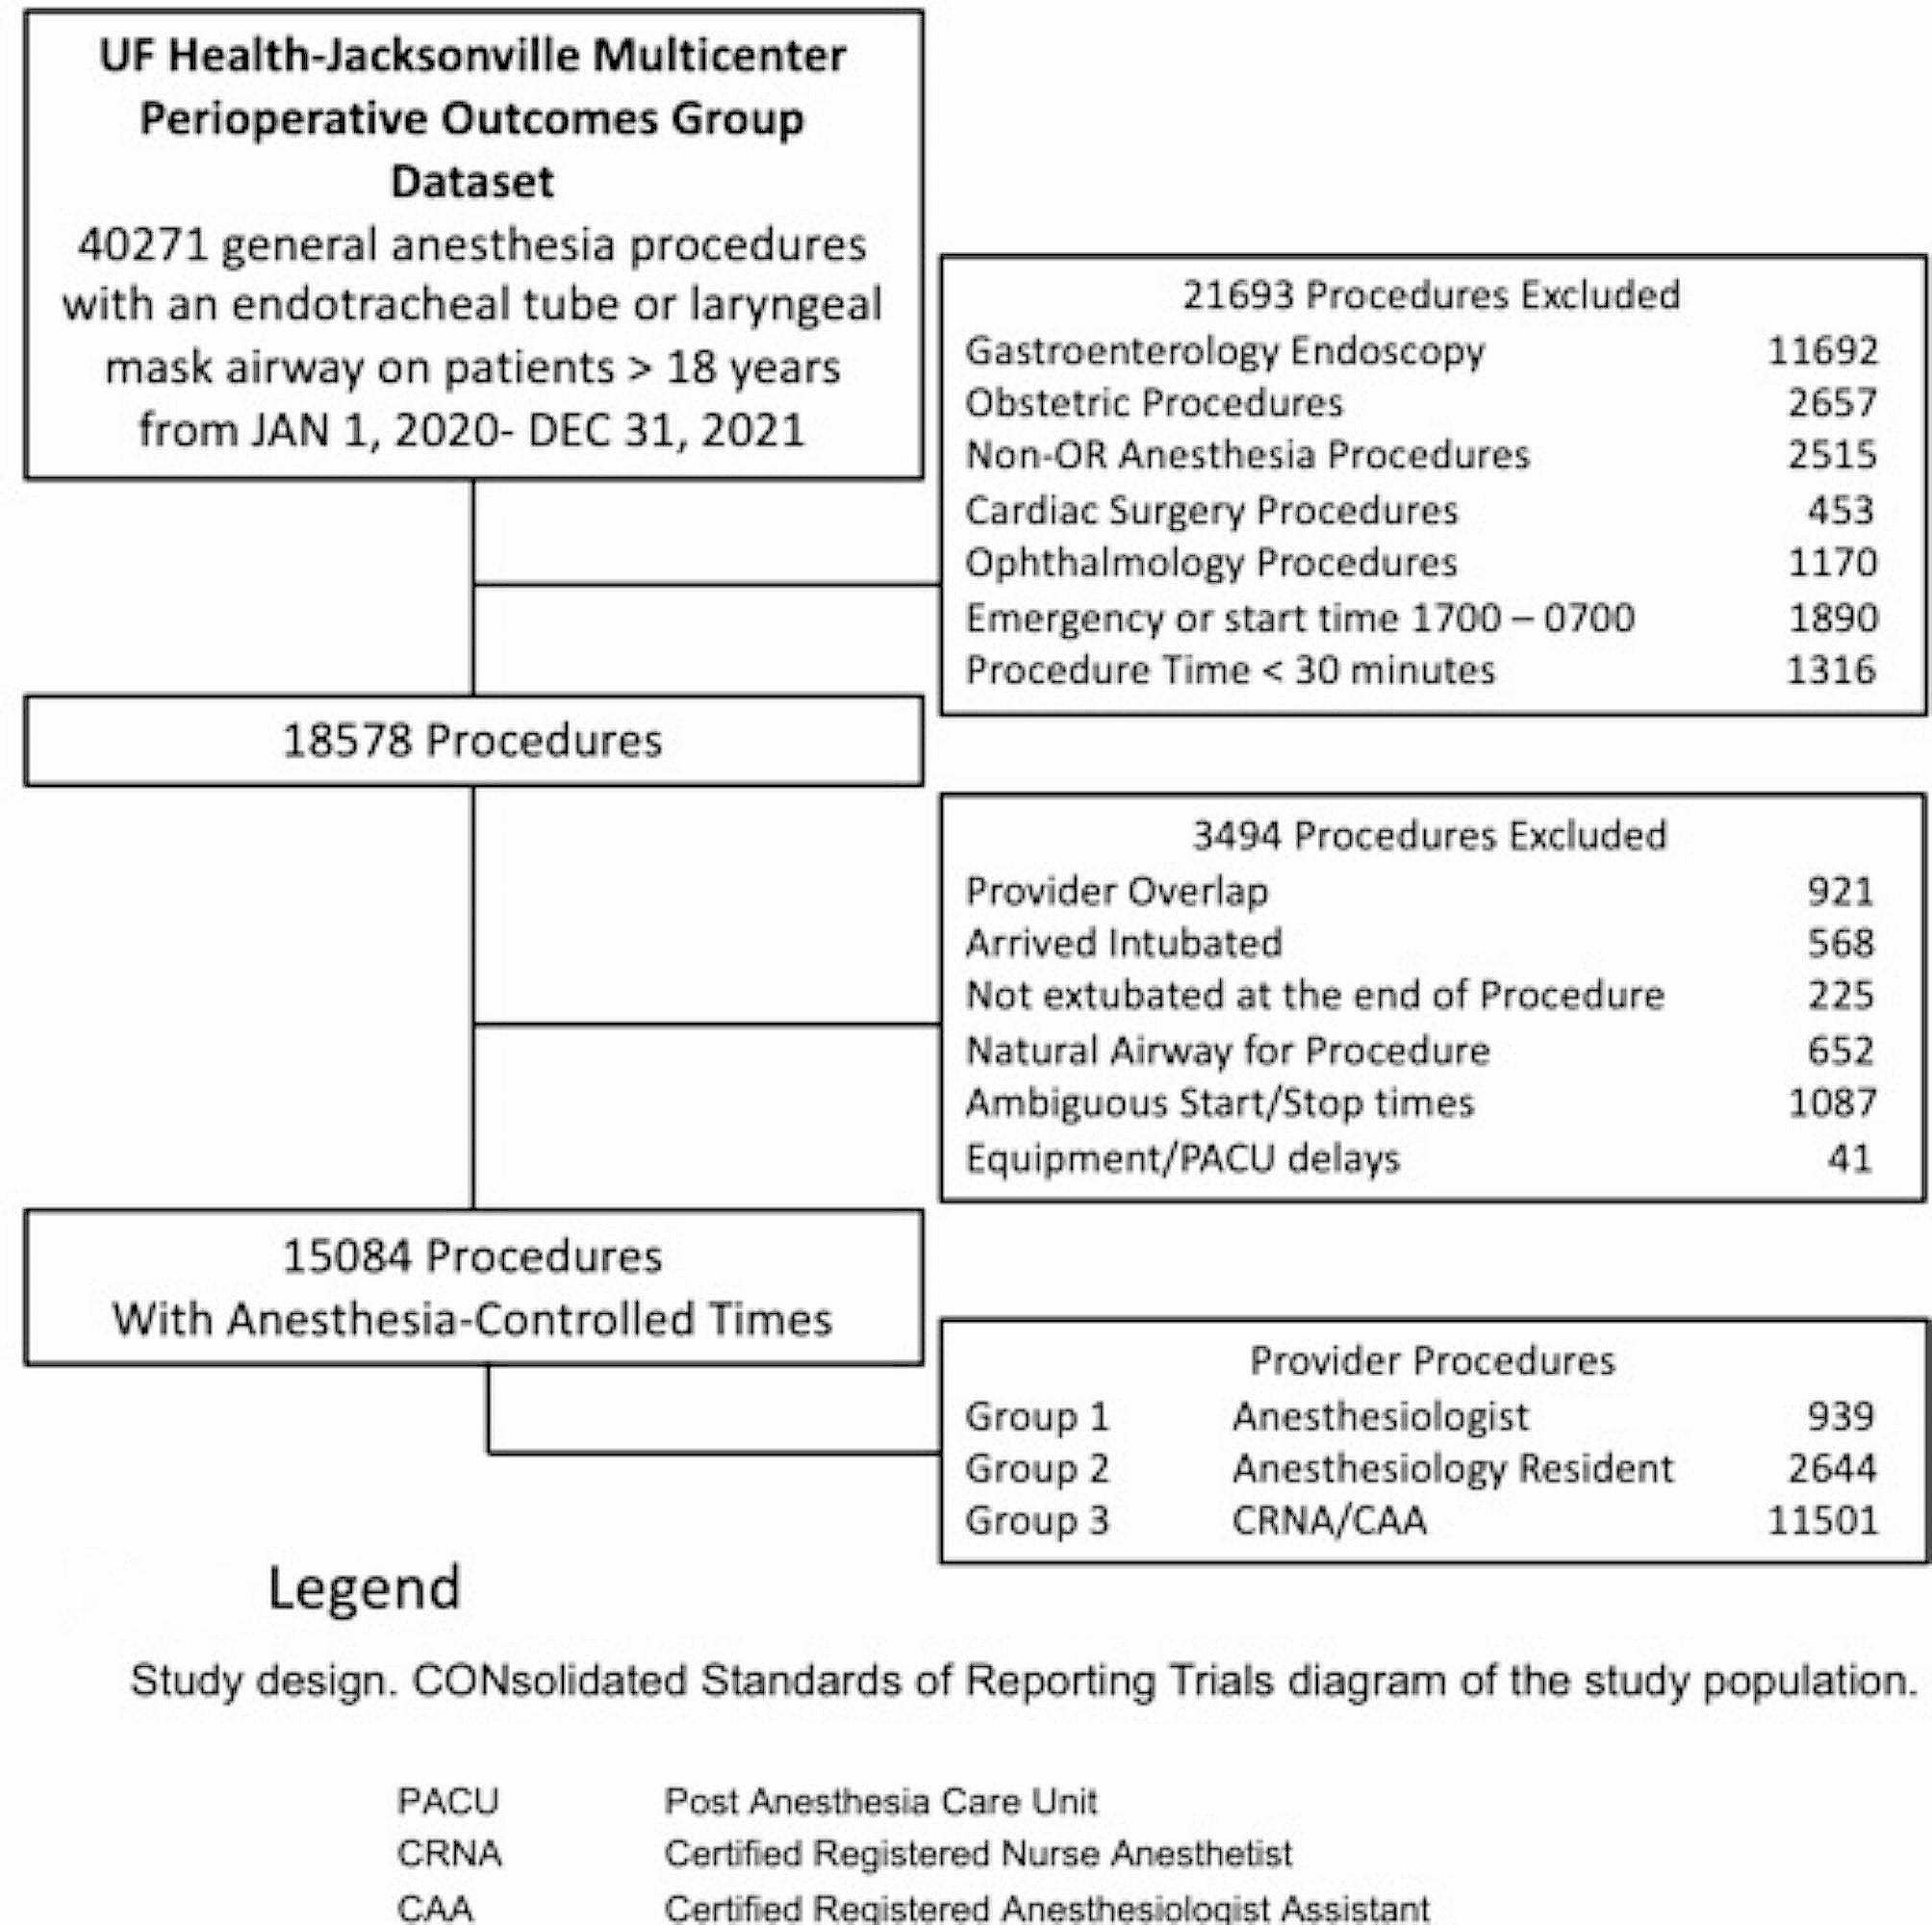 The impact of an anesthesia residency teaching service on anesthesia-controlled time and postsurgical patient outcomes: a retrospective observational study on 15,084 surgical cases